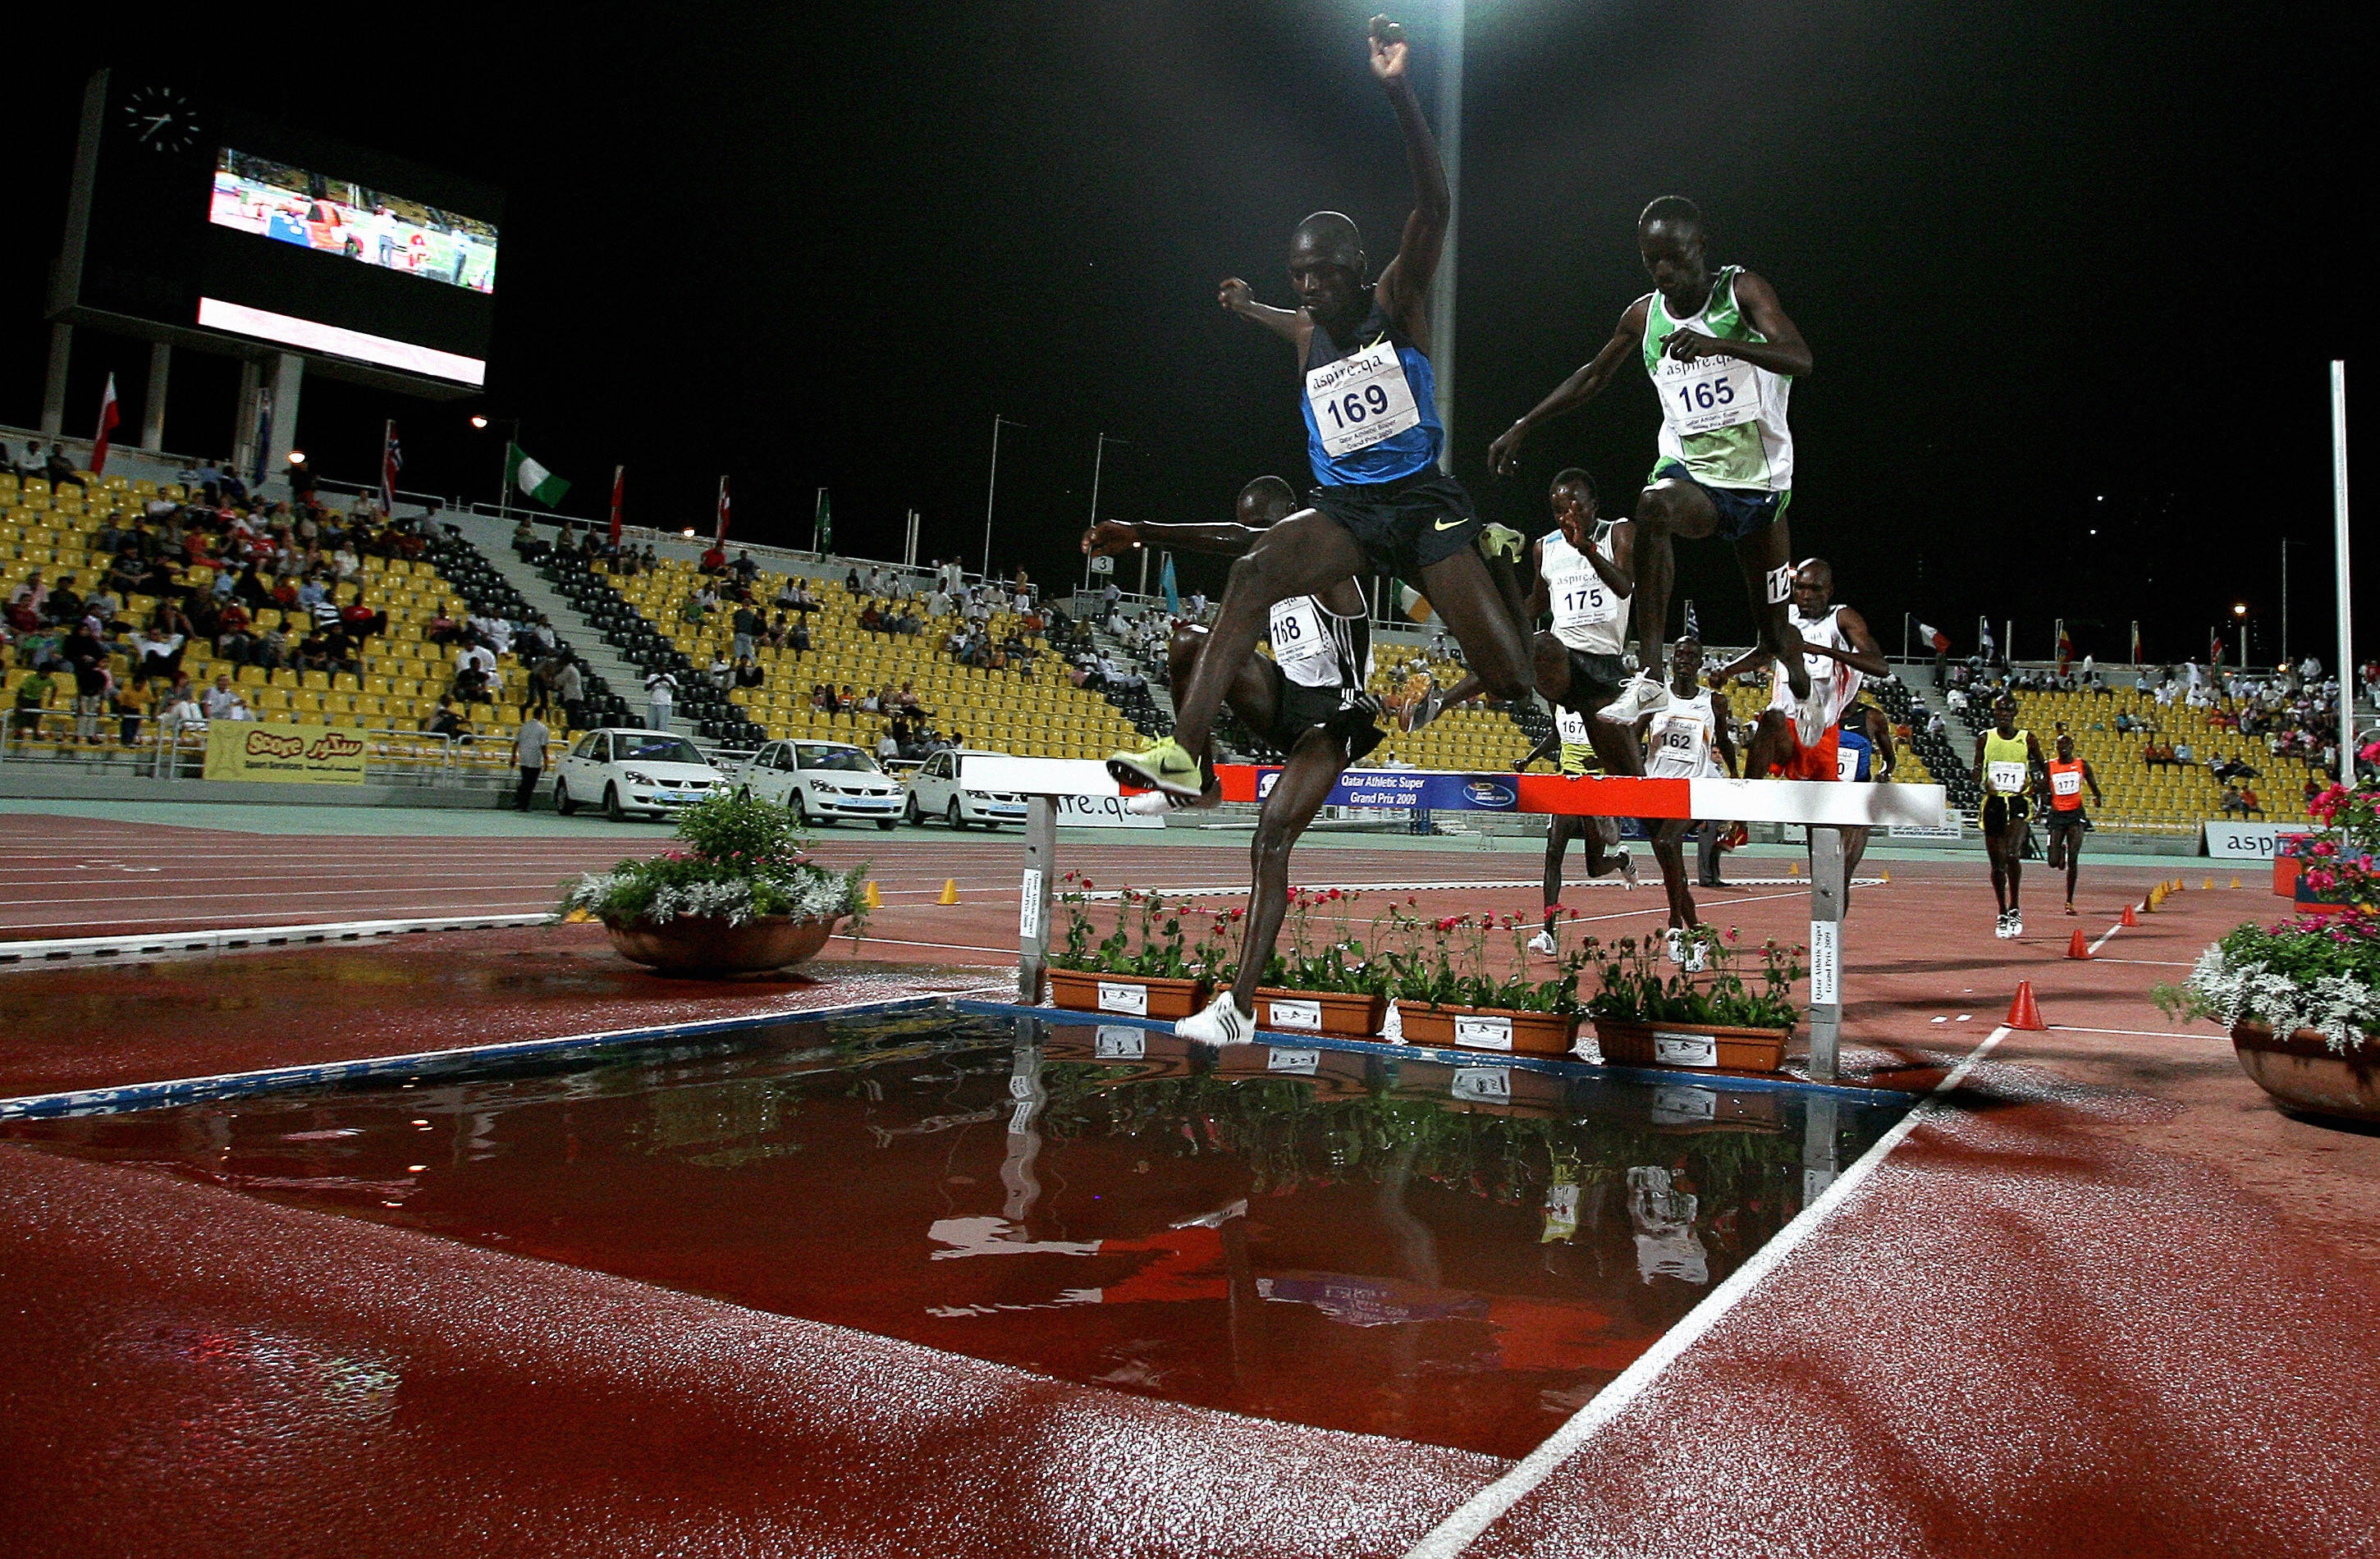 MARWAN NAAMANI/AFP/Getty Images.Kenya's Ezekiel Kemboi (R) and Paul Kipsiele Koech jump over a pool of water during the men's 3000m steeplechase race at the Qatar Super Grand Prix in Doha late on May 8, 2009. Kemboi clinched the first place while Koech came in second.